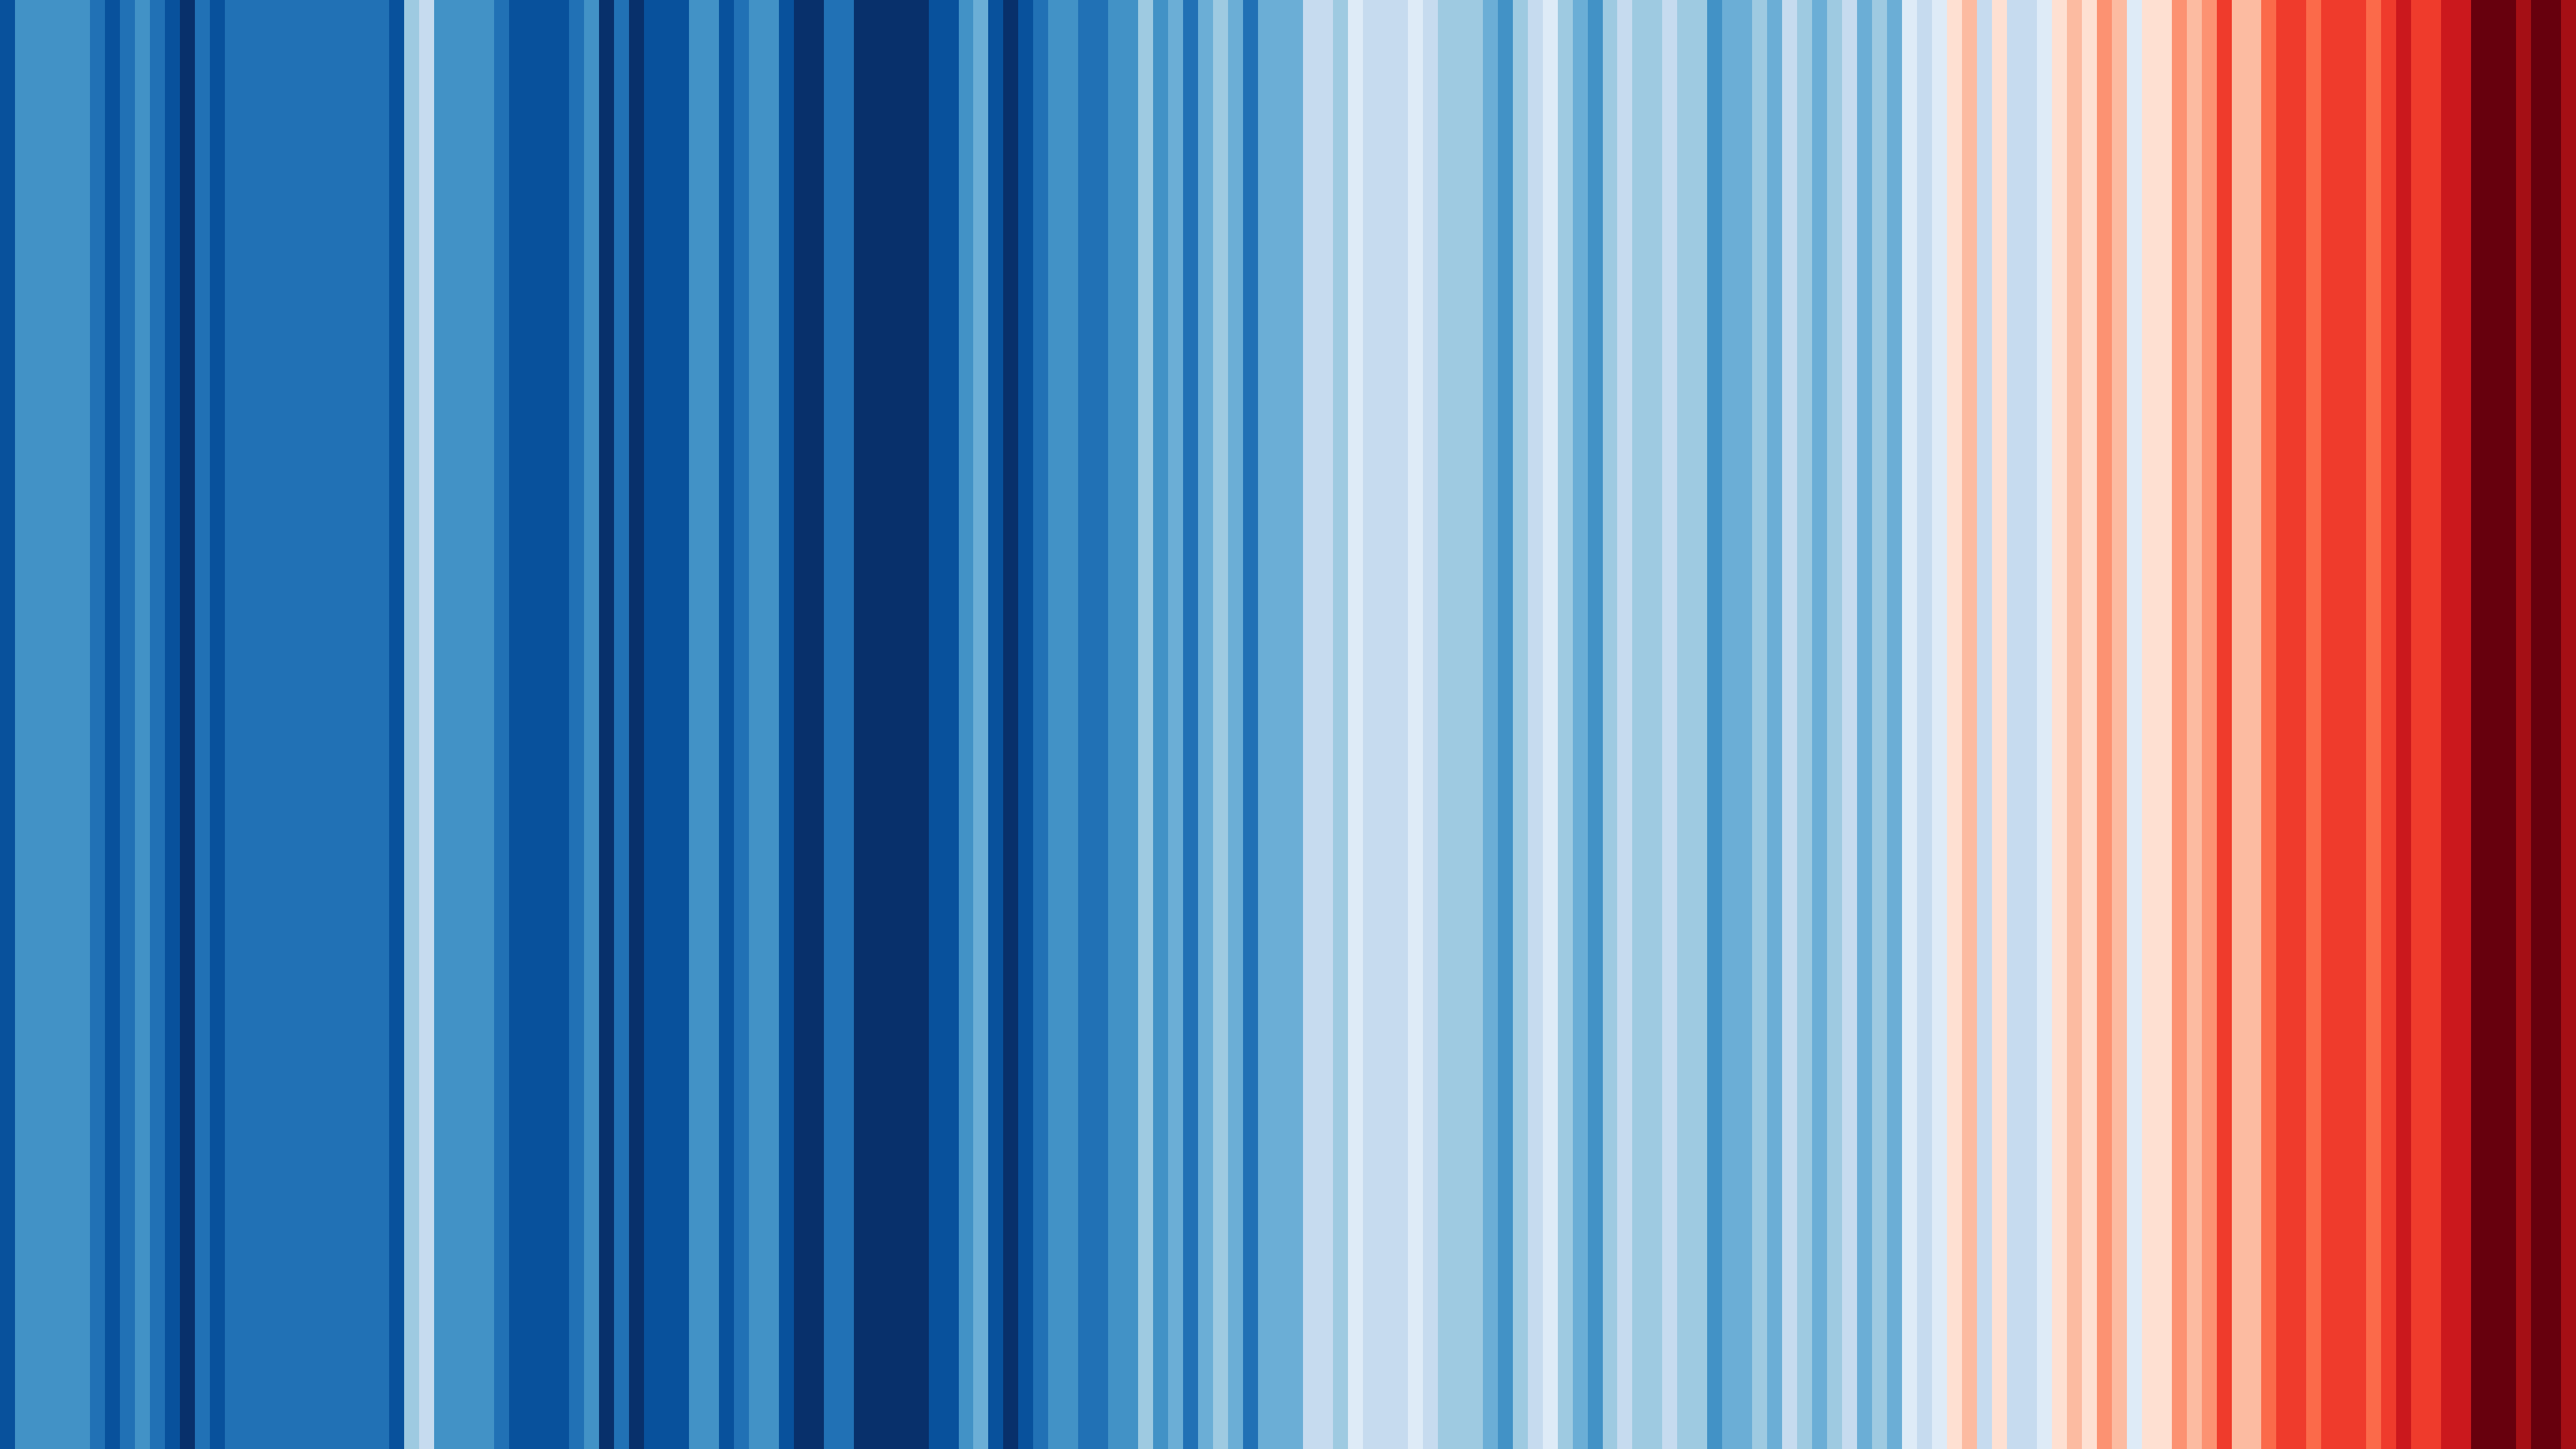 Climate weather stripes